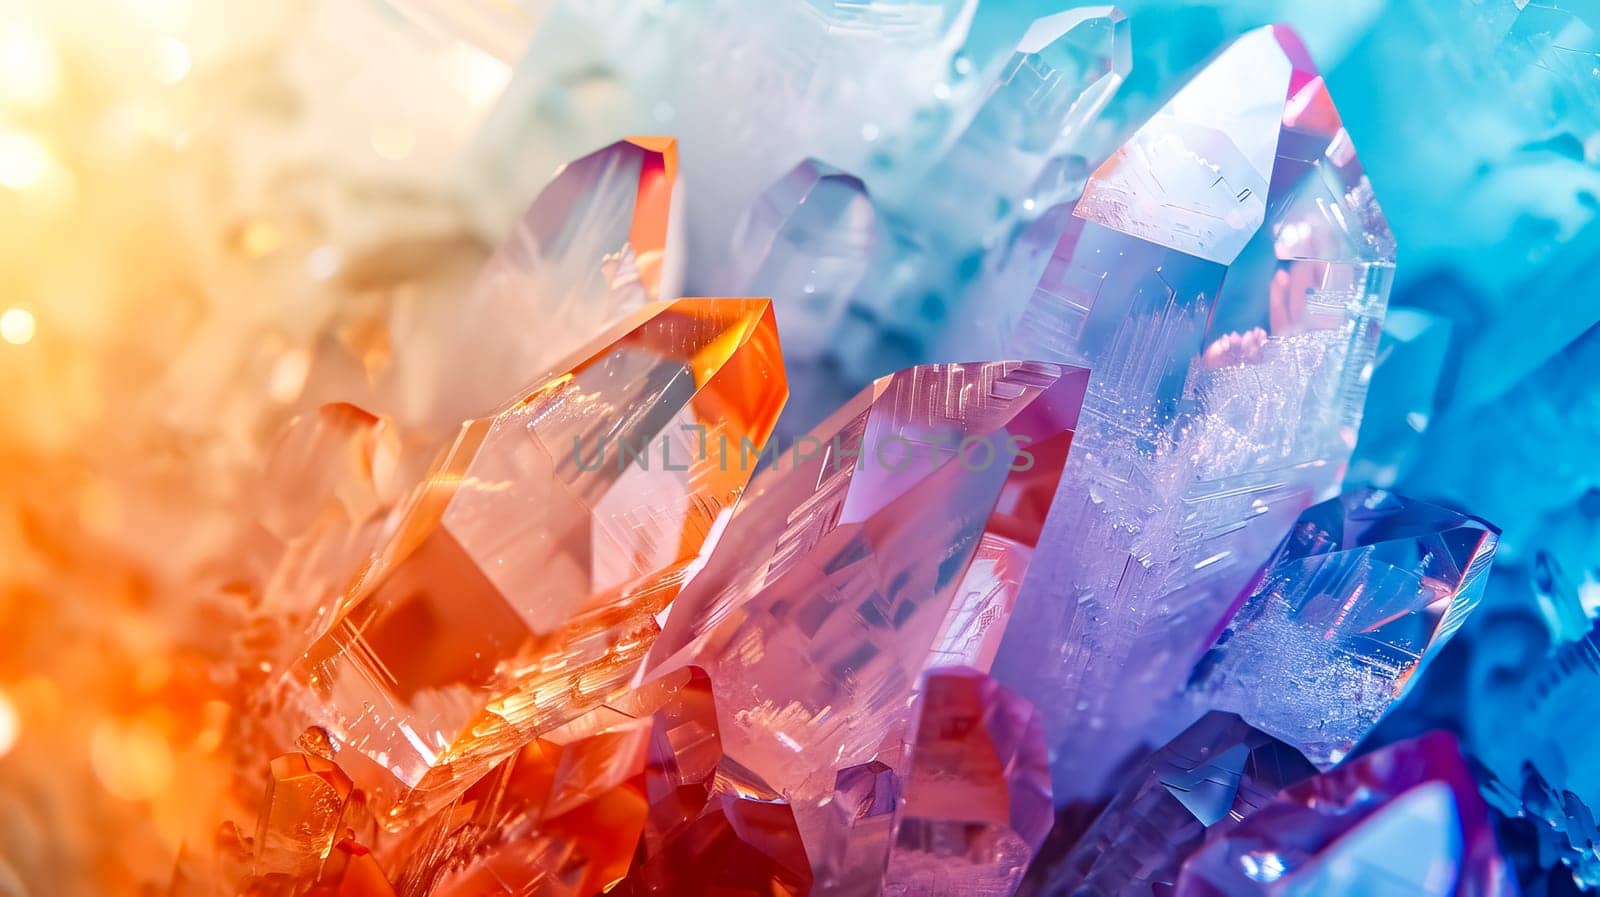 Close-up of multi-colored crystals under gradient lighting, blending warm and cool tones